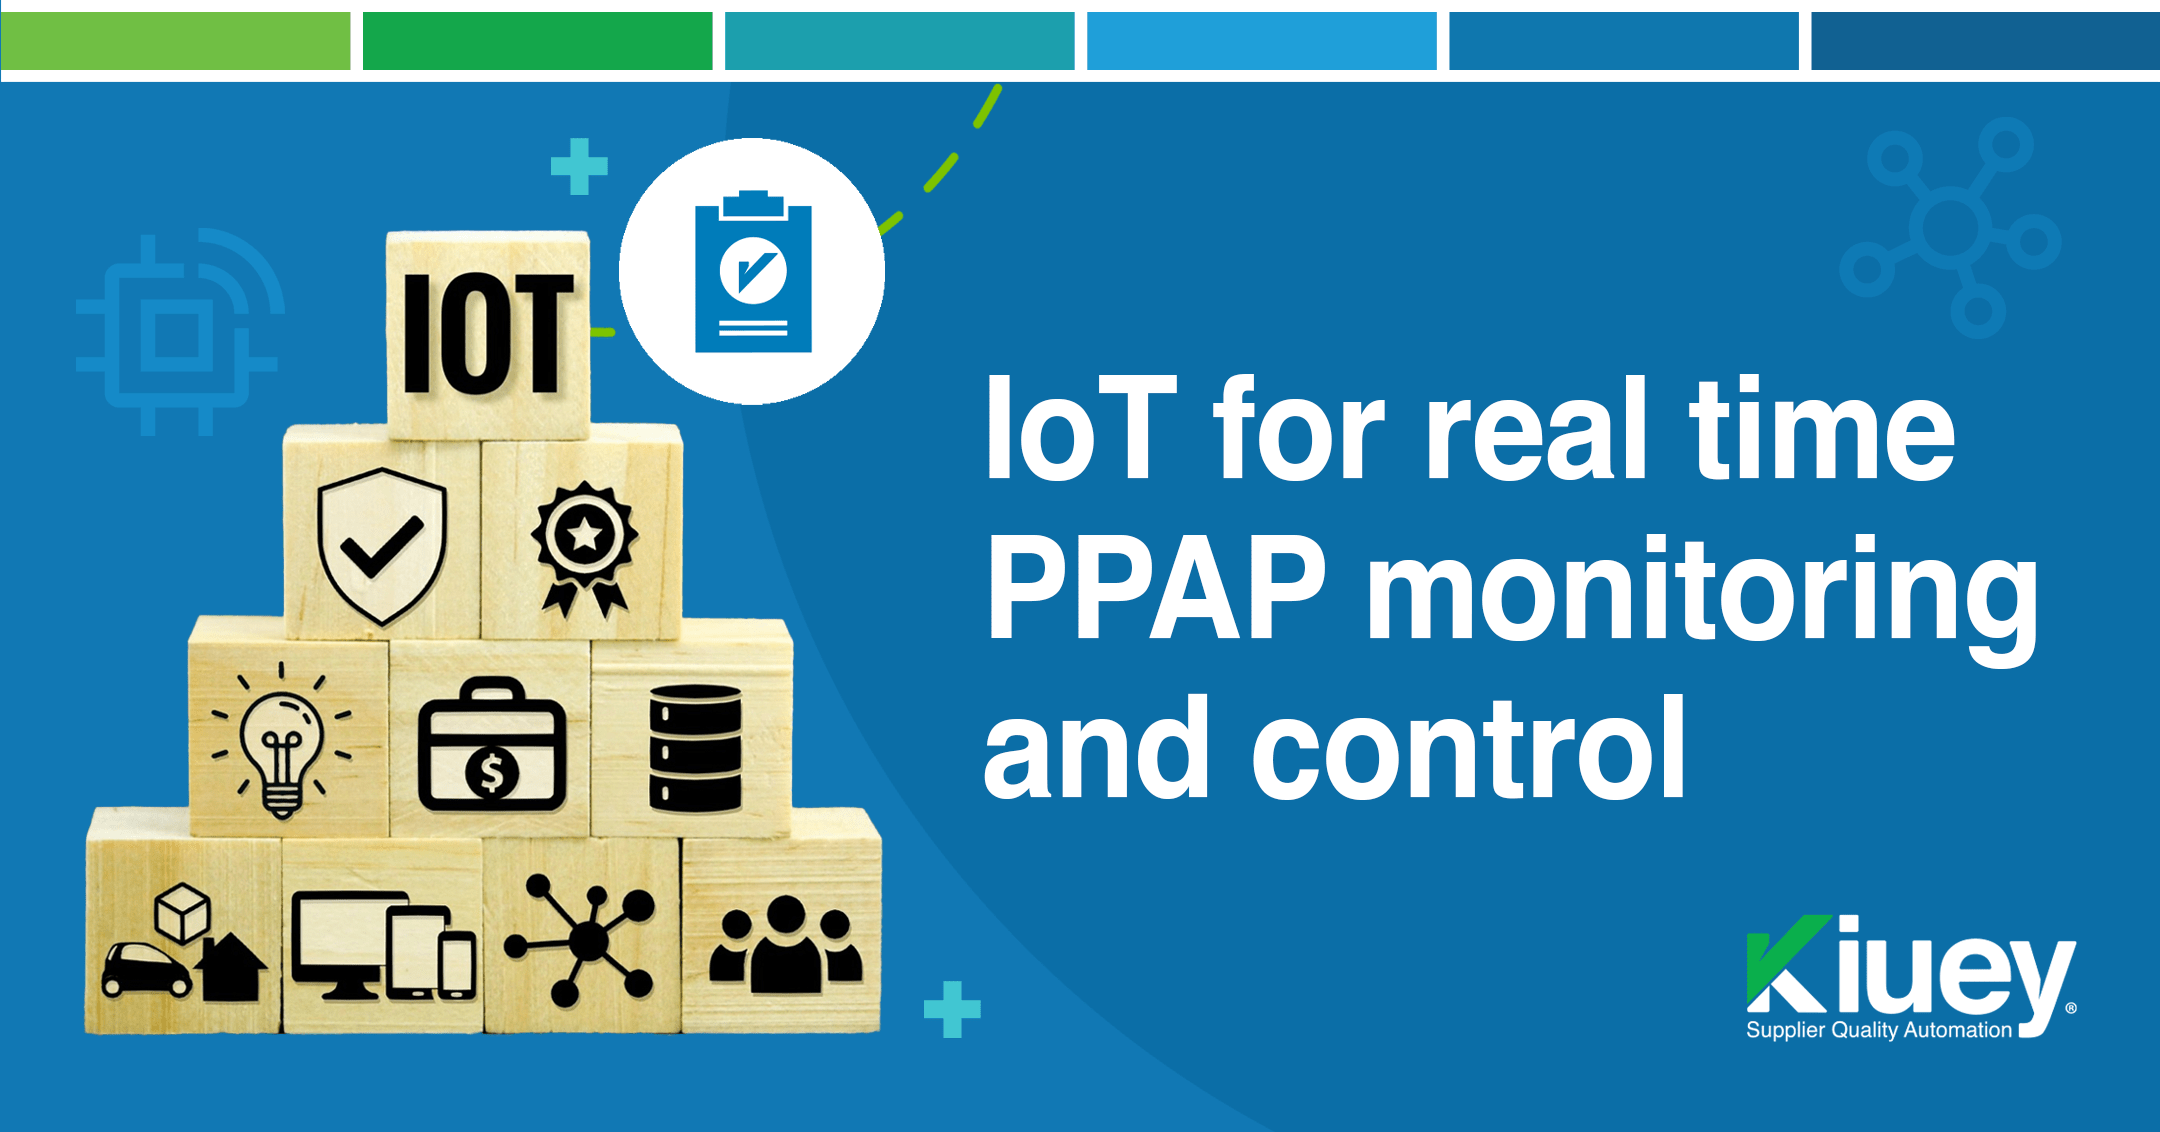 IoT: A Game-Changer for PPAP